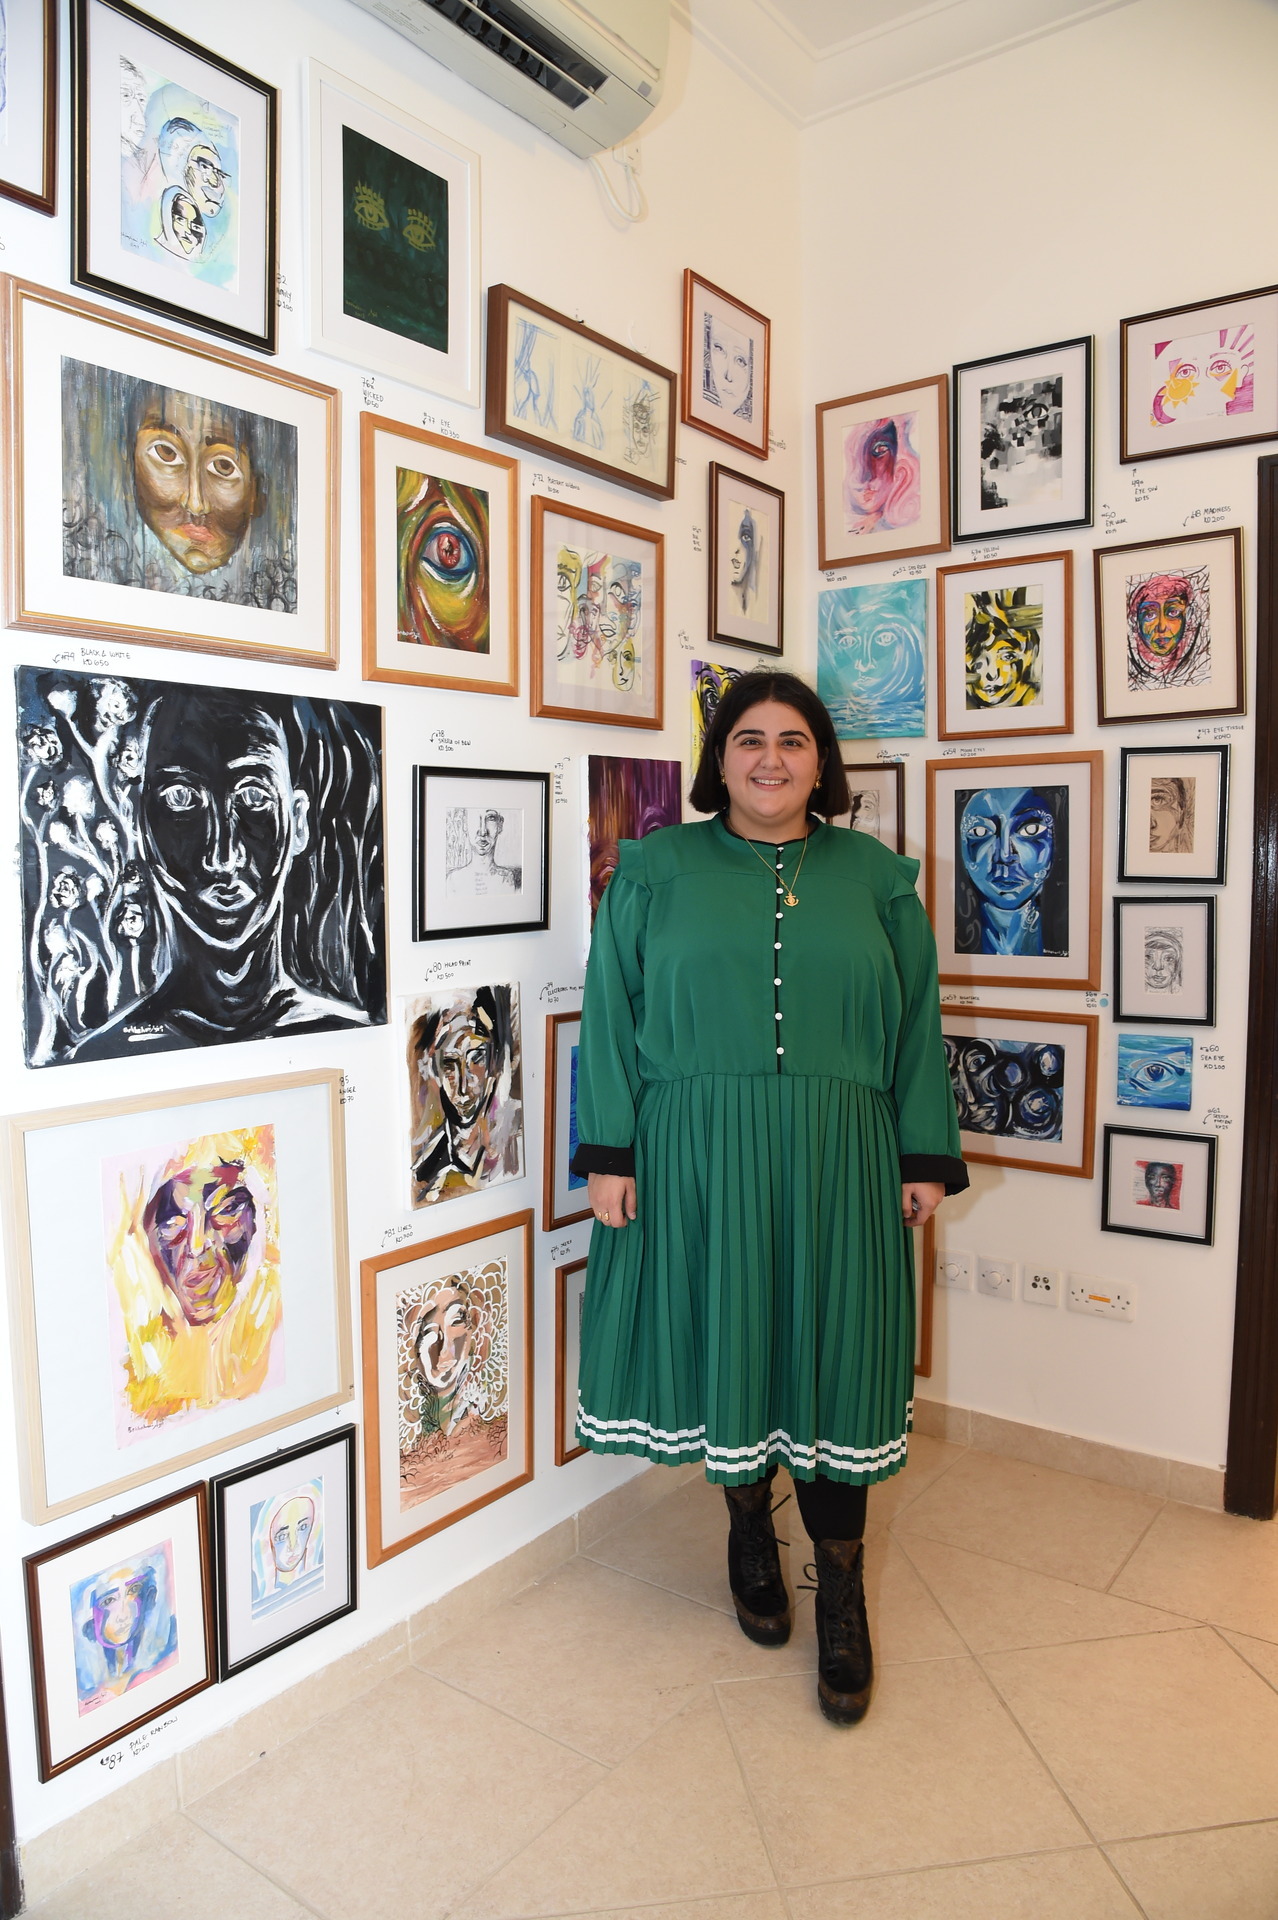 Hi I am Anwar Behbehani, a 27 year old female artist from Kuwait. I just had my 700+ art pieces solo exhibition. It was my dream. I ended up curating almost 400 paintings, 400 photographs, a self published book, and an art store with my work printed...